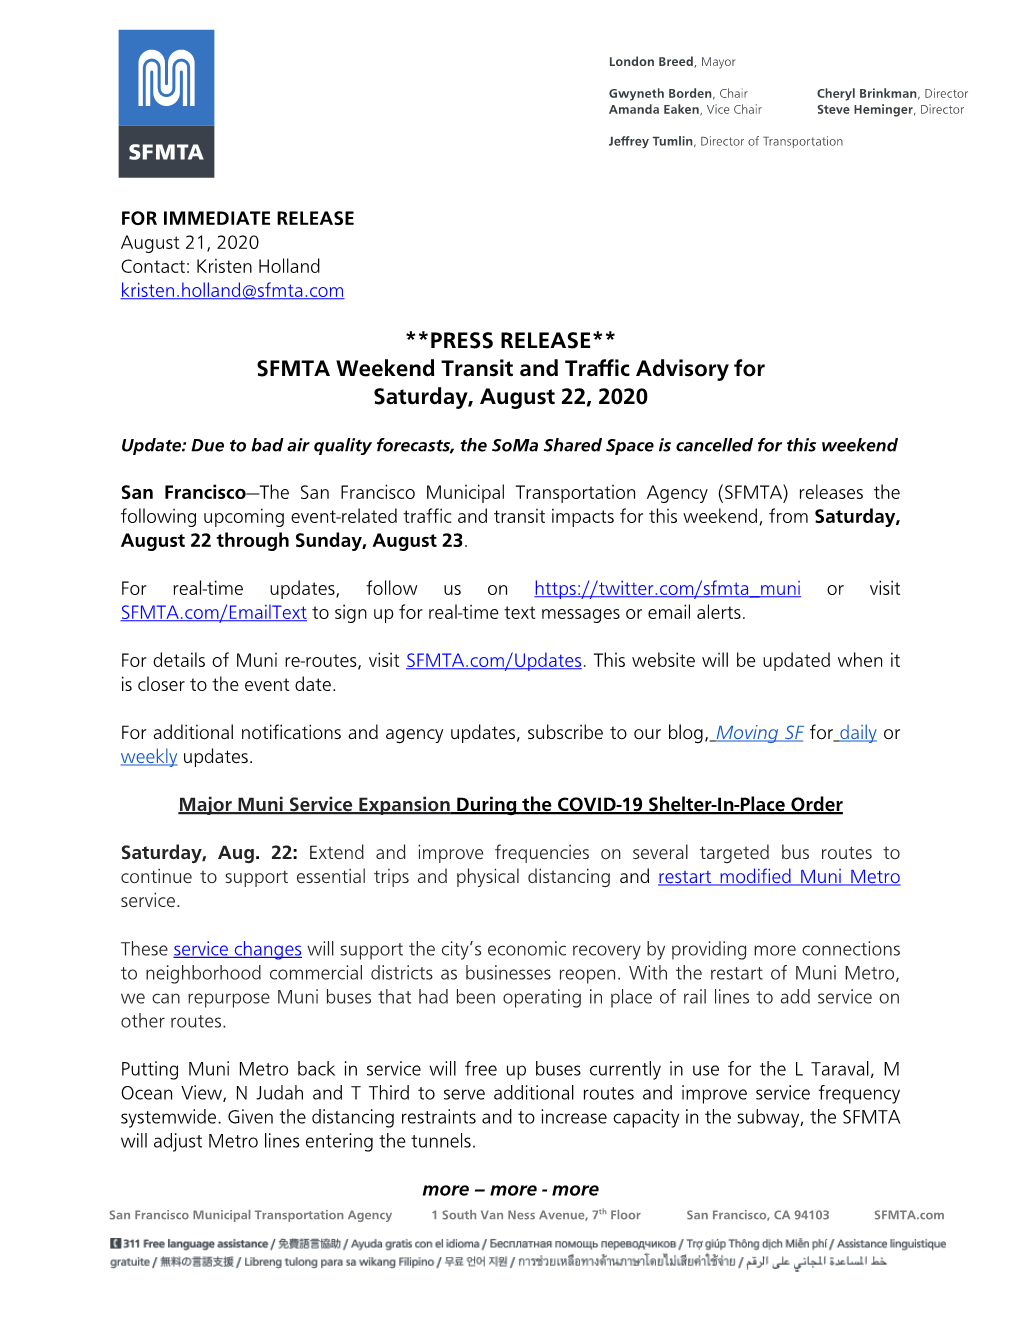 **PRESS RELEASE** SFMTA Weekend Transit and Traffic Advisory for Saturday, August 22, 2020